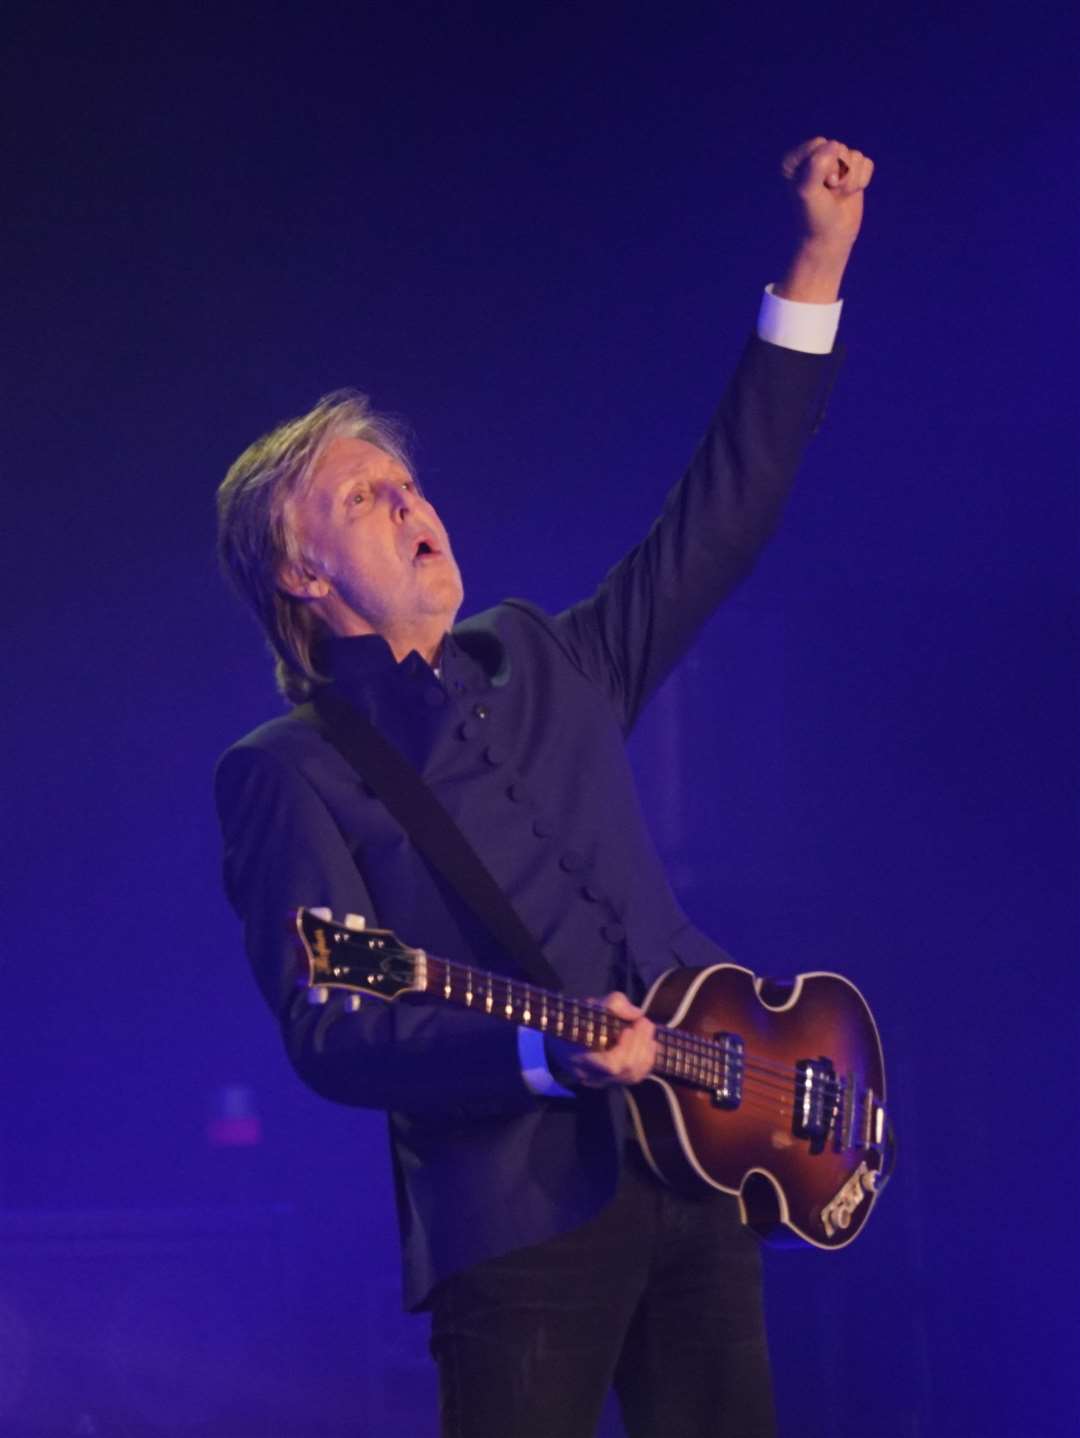 Sir Paul McCartney with a more recent bass guitar at Glastonbury Festival last year (Yui Mok/PA)